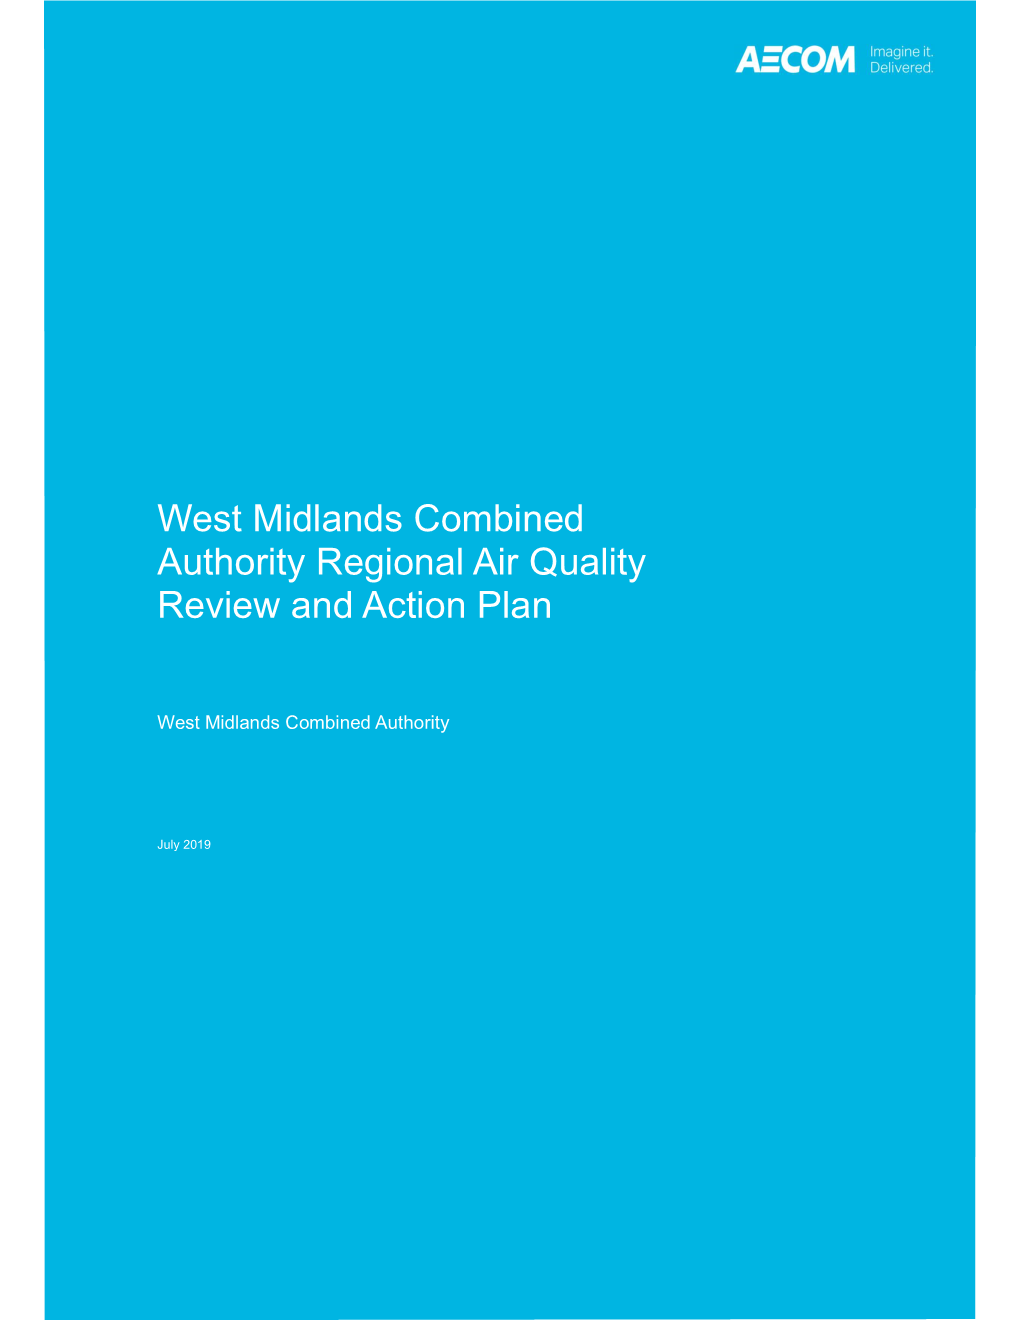 West Midlands Regional Air Quality Review and Action Plan